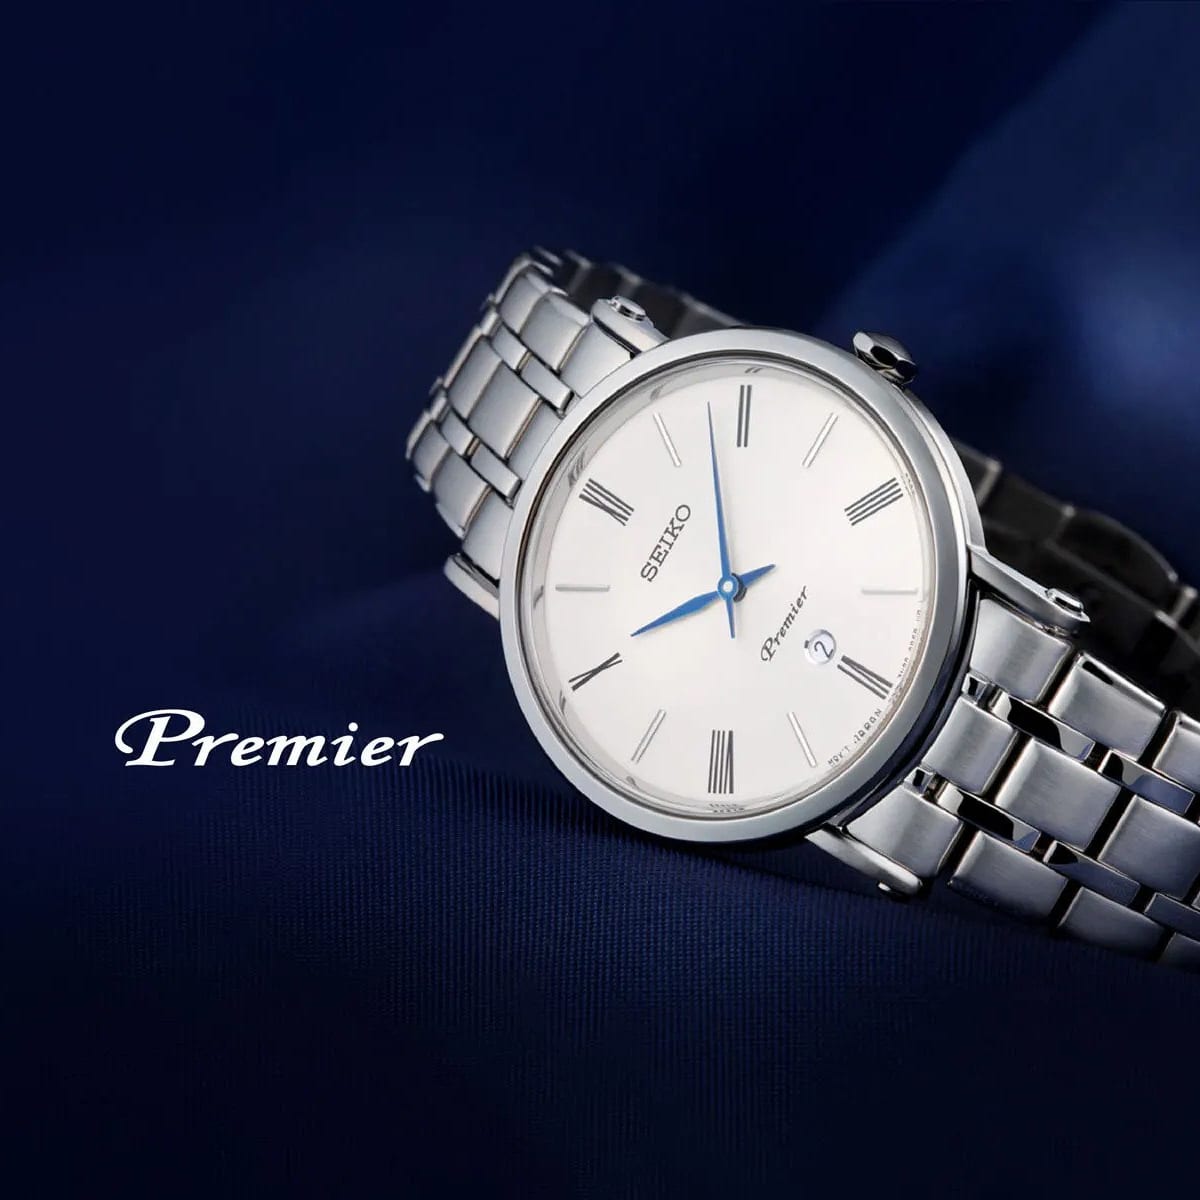 Seiko Watches: Reflecting the Luxury Sophistication -